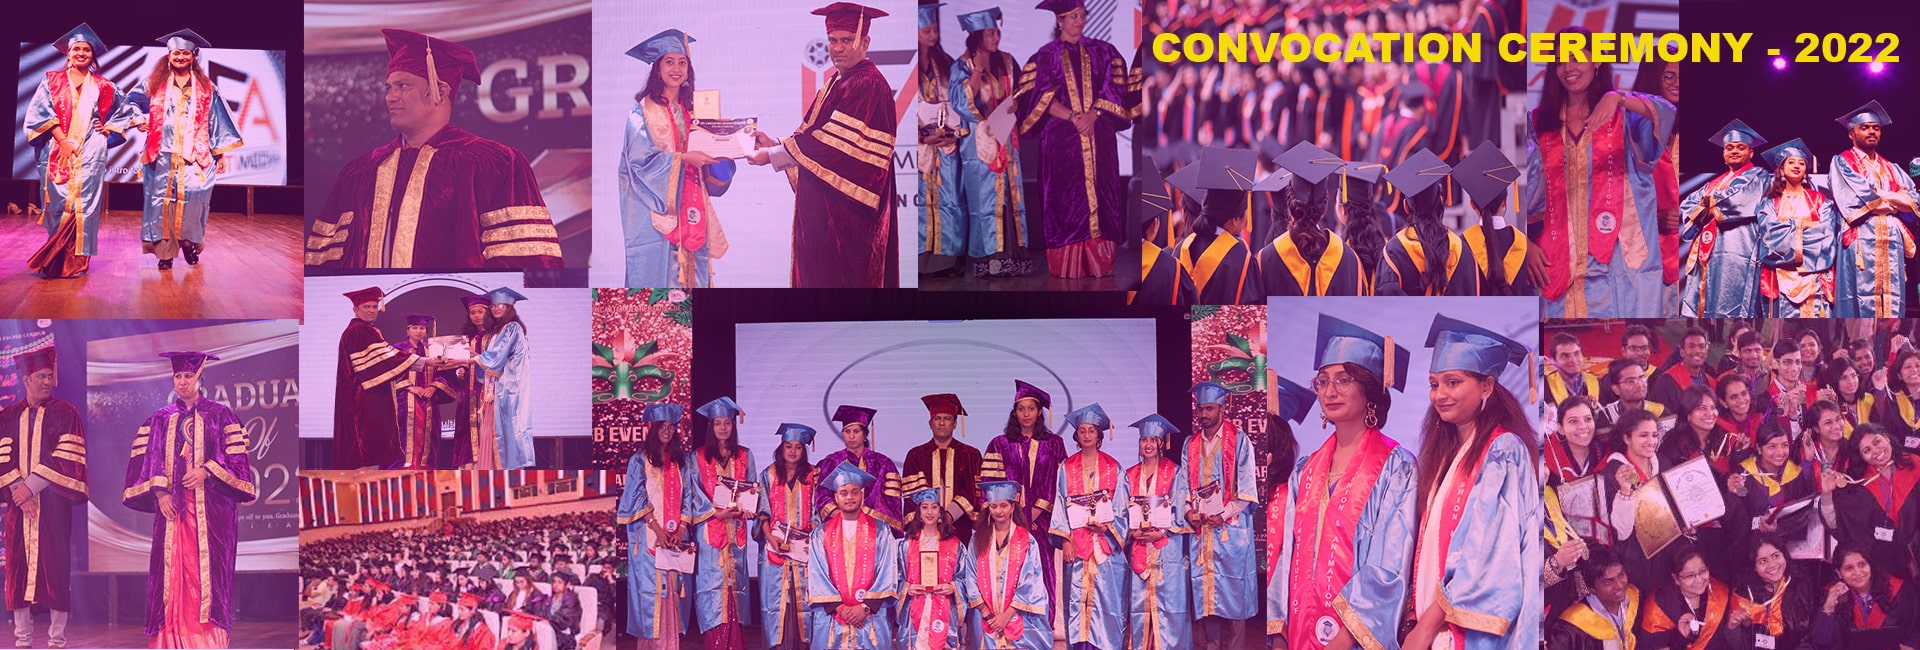 students convocation